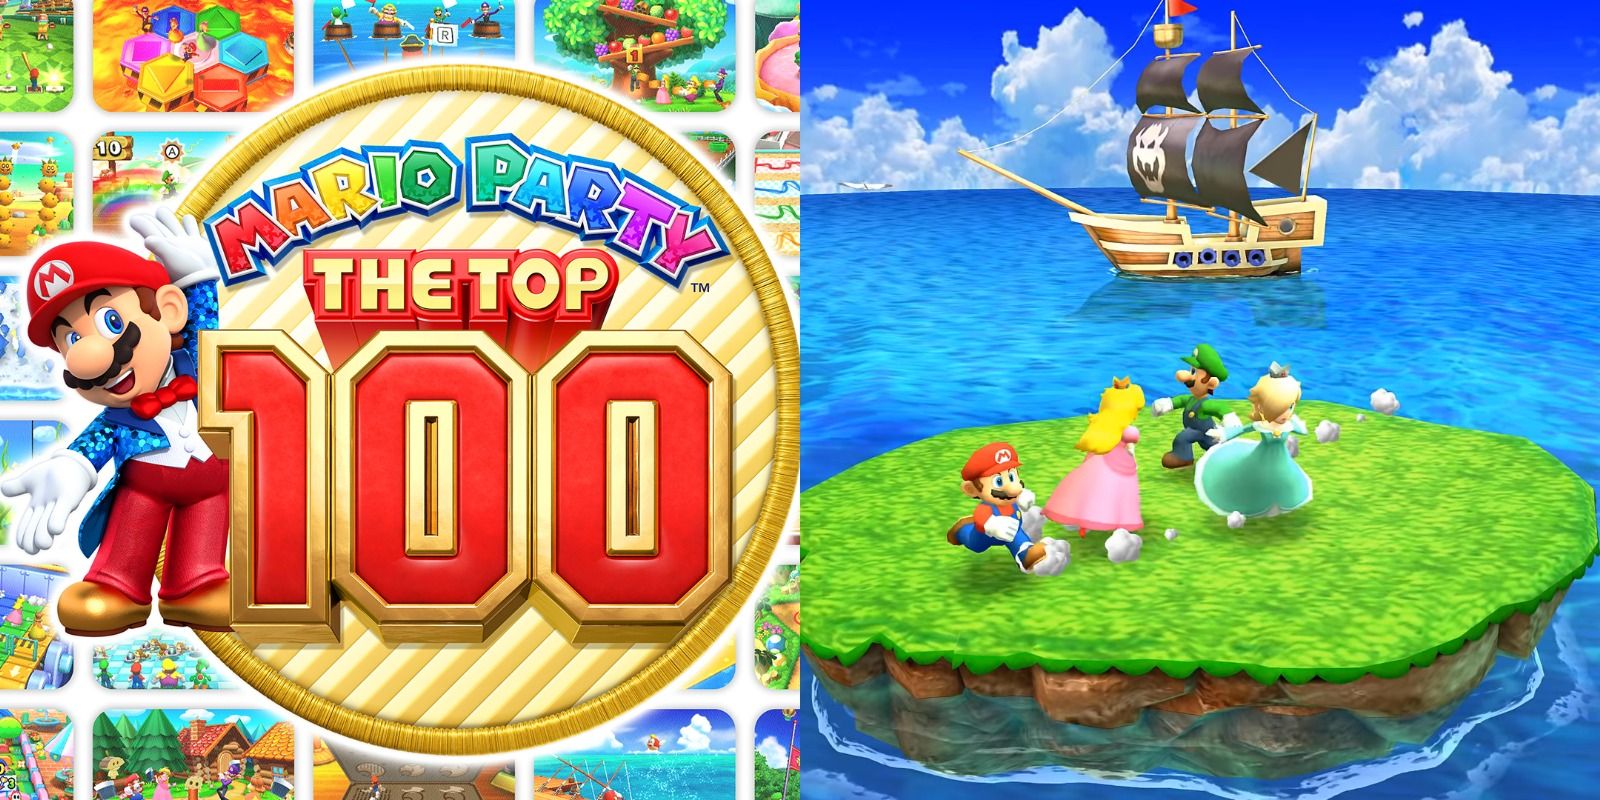 Mario Party The Top 100 for the Nintendo 3DS